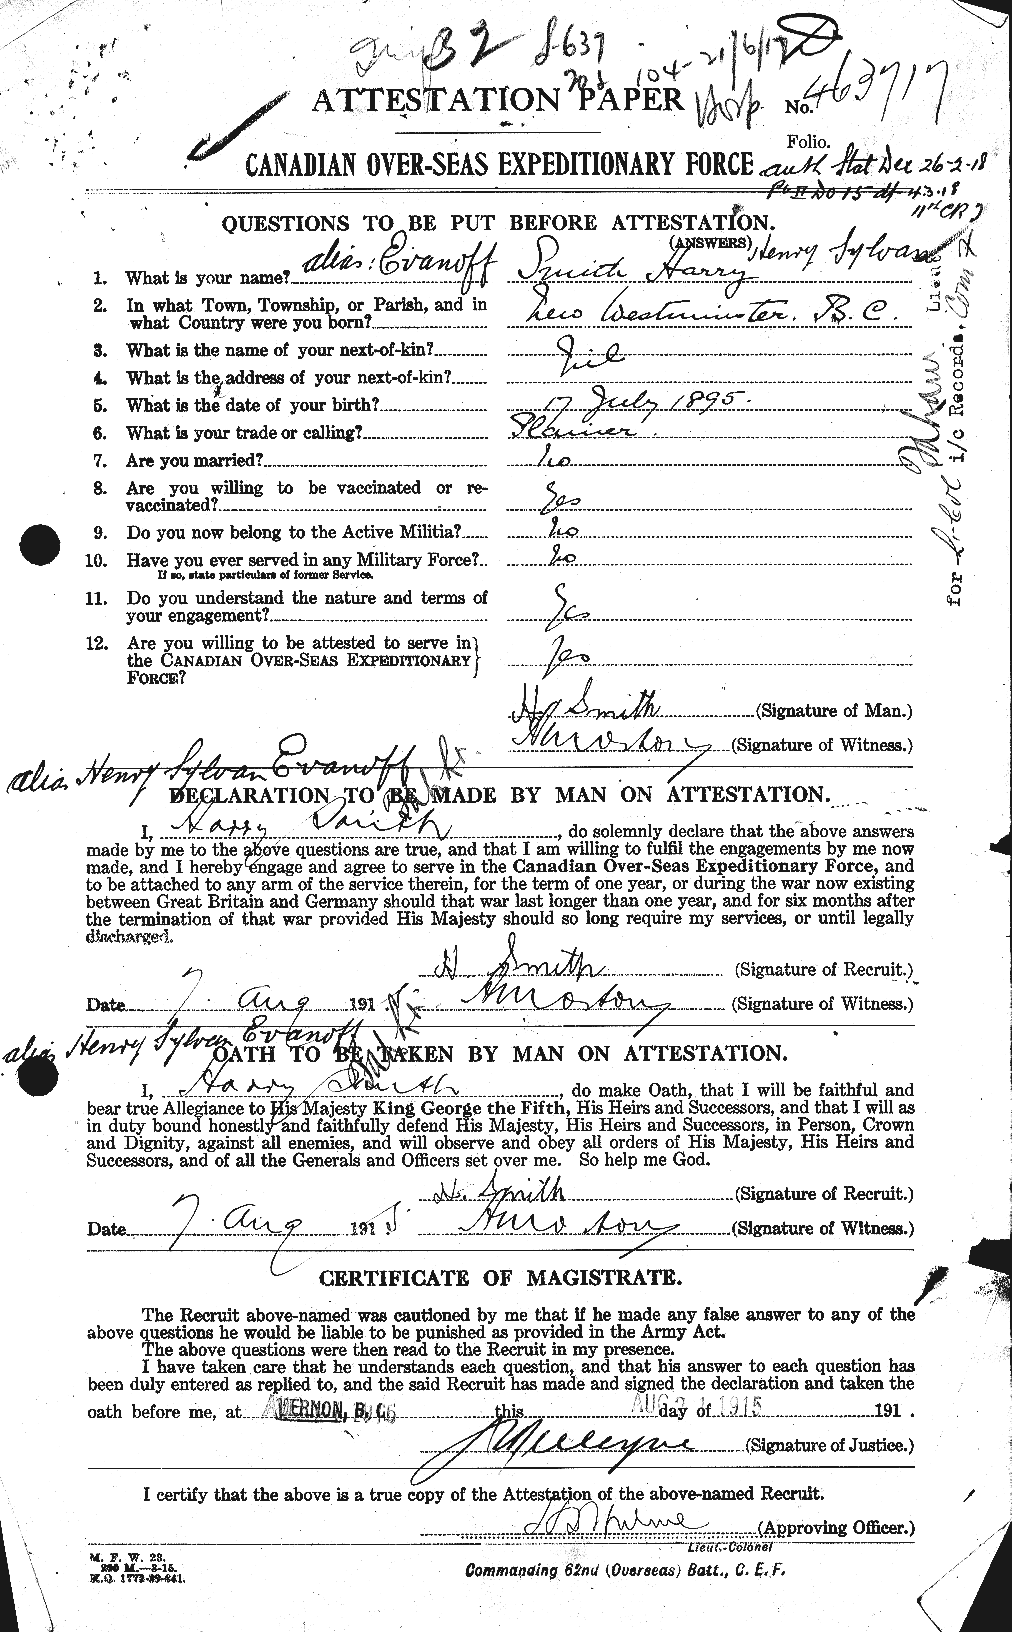 Personnel Records of the First World War - CEF 314827a